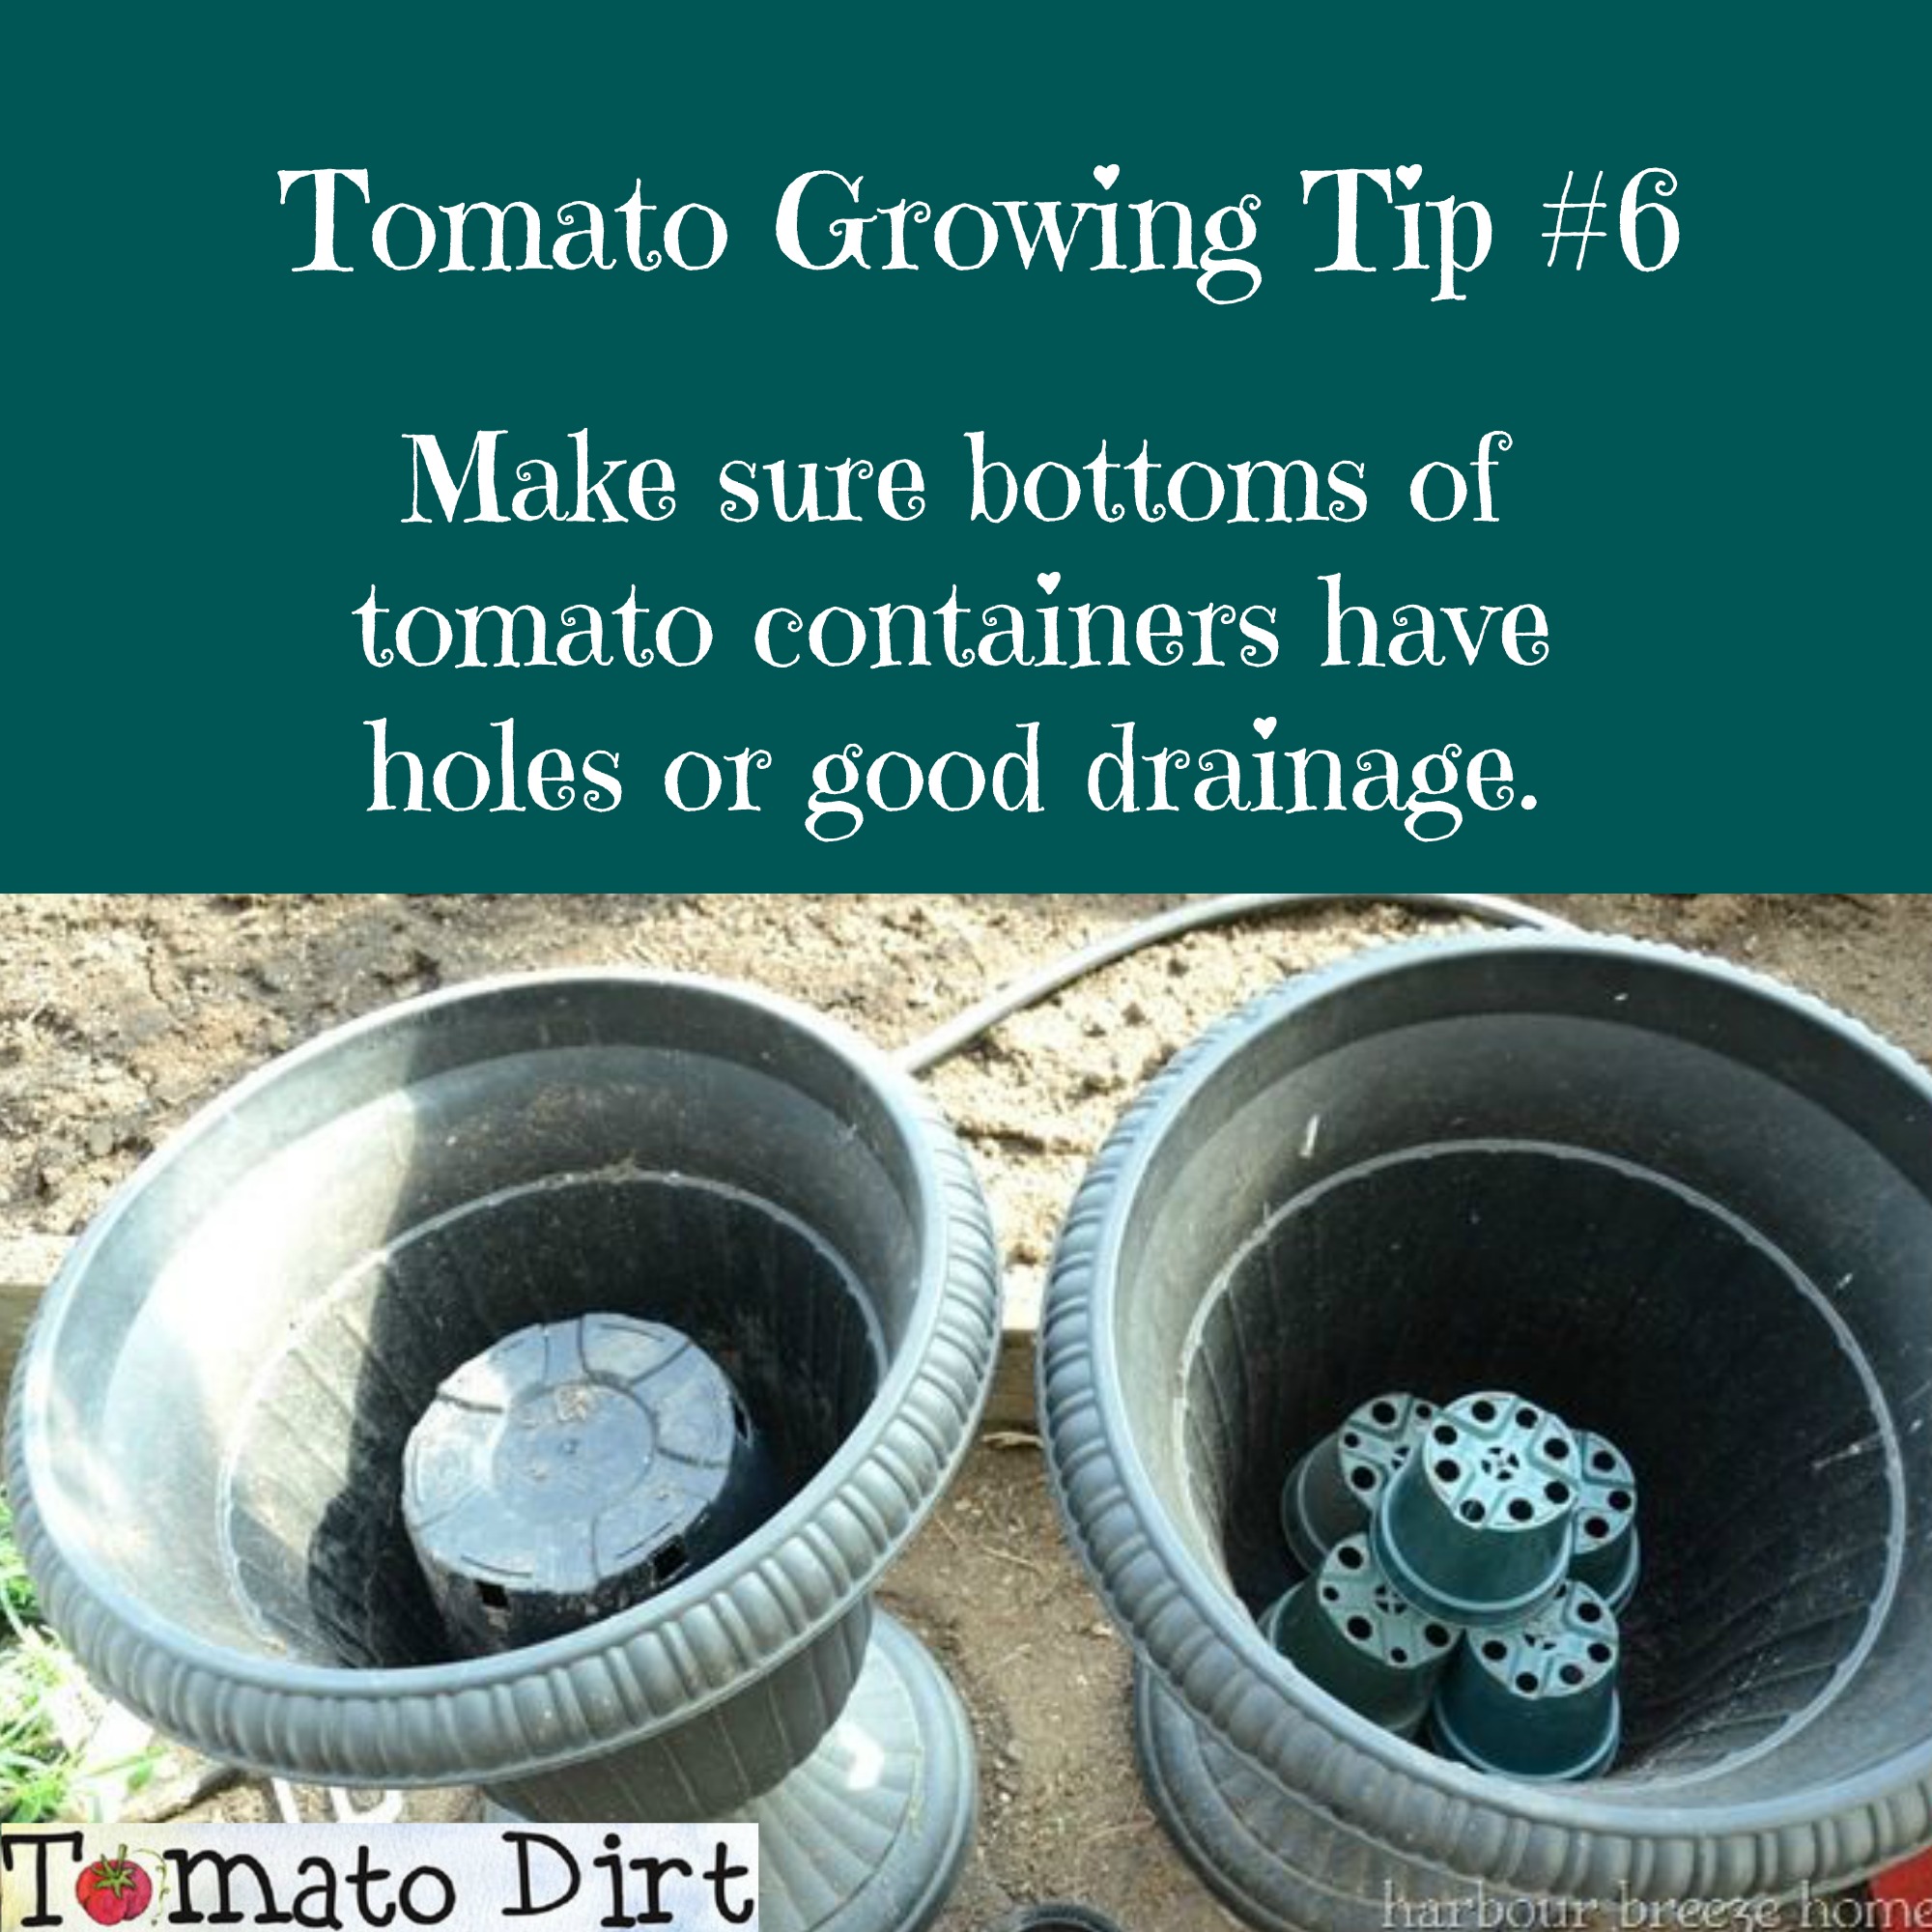 Tomato Growing Tip #6: make sure tomato containers have holes for drainage with Tomato Dirt